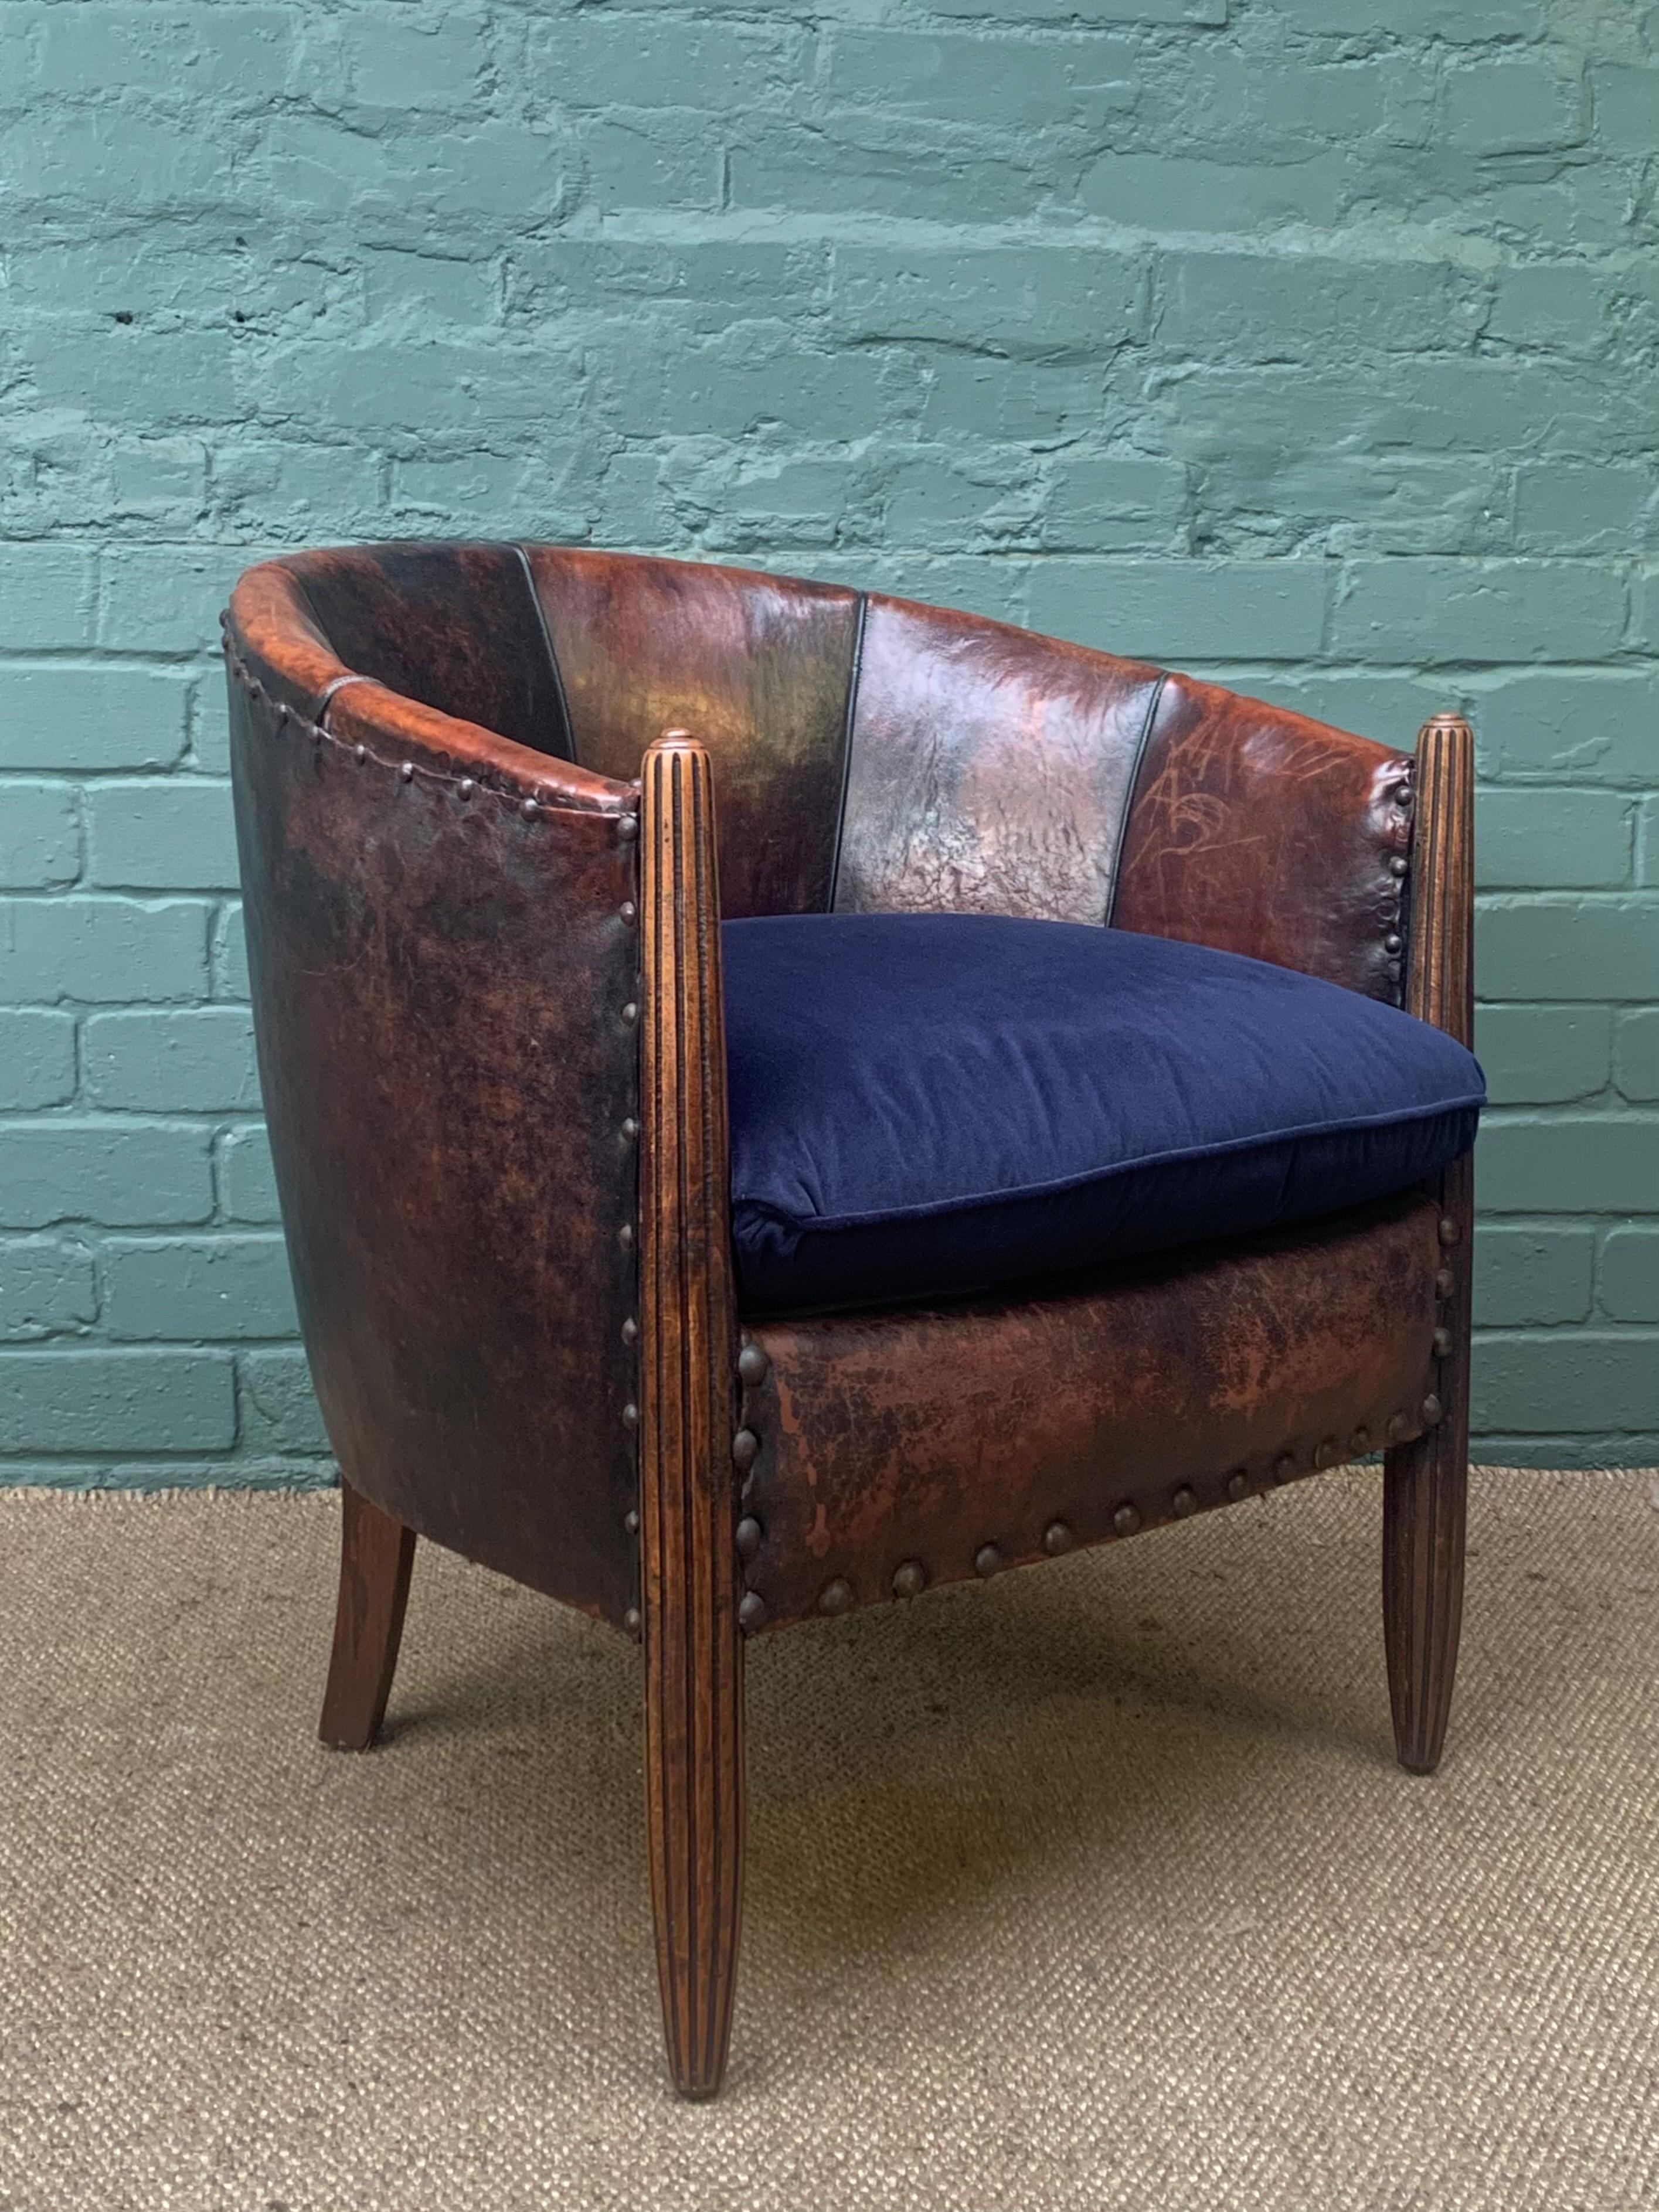 This is a beautiful and very rare chair that still retains its original leather. The  leather is of the highest quality and has therefore stood the test of time. There are no rips or previous repairs and the hand-dyed leather now boasts the most